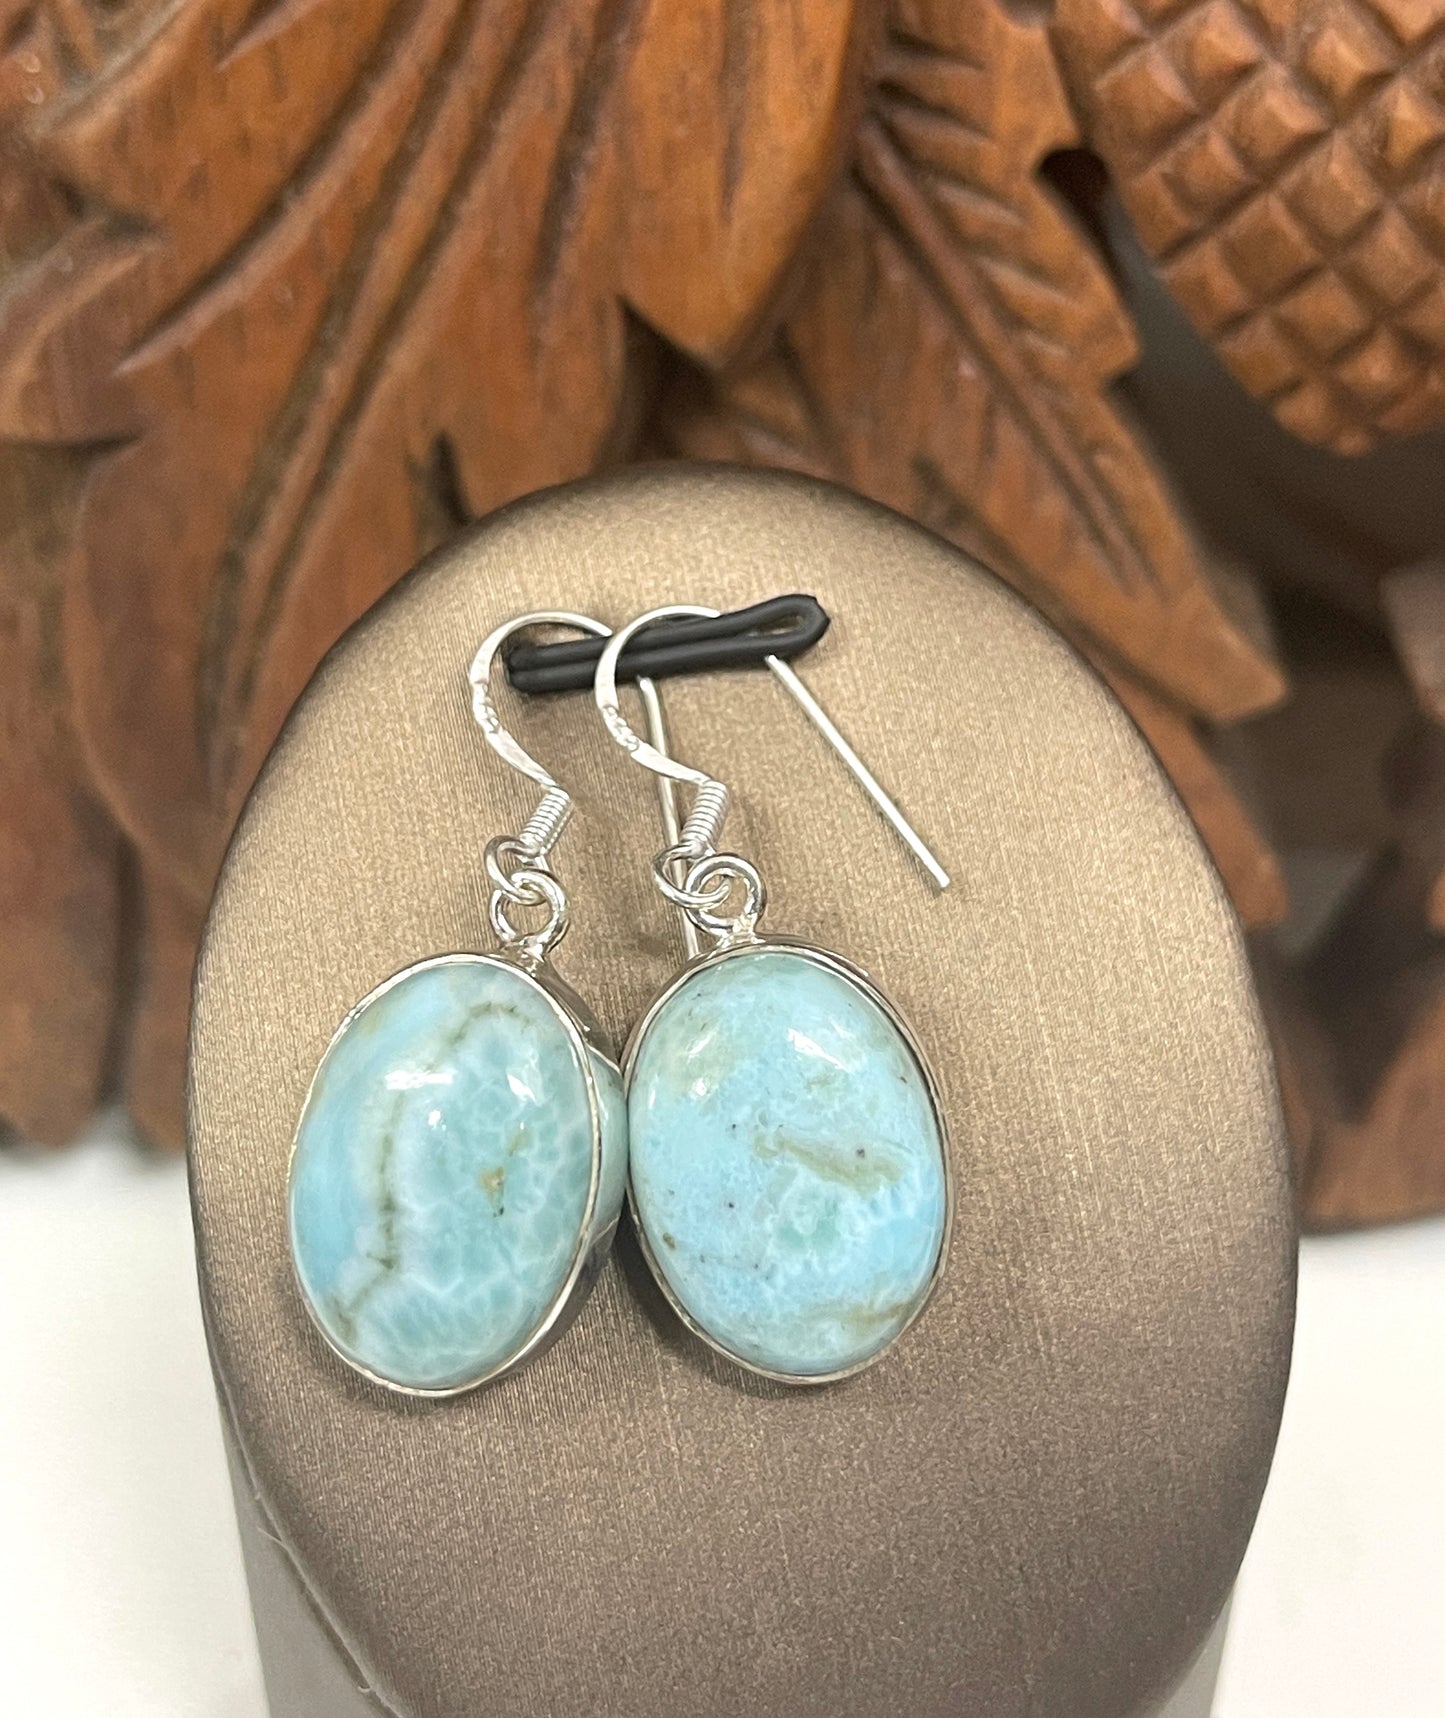 Larimar Sterling Silver Earrings - 4 sizes Available